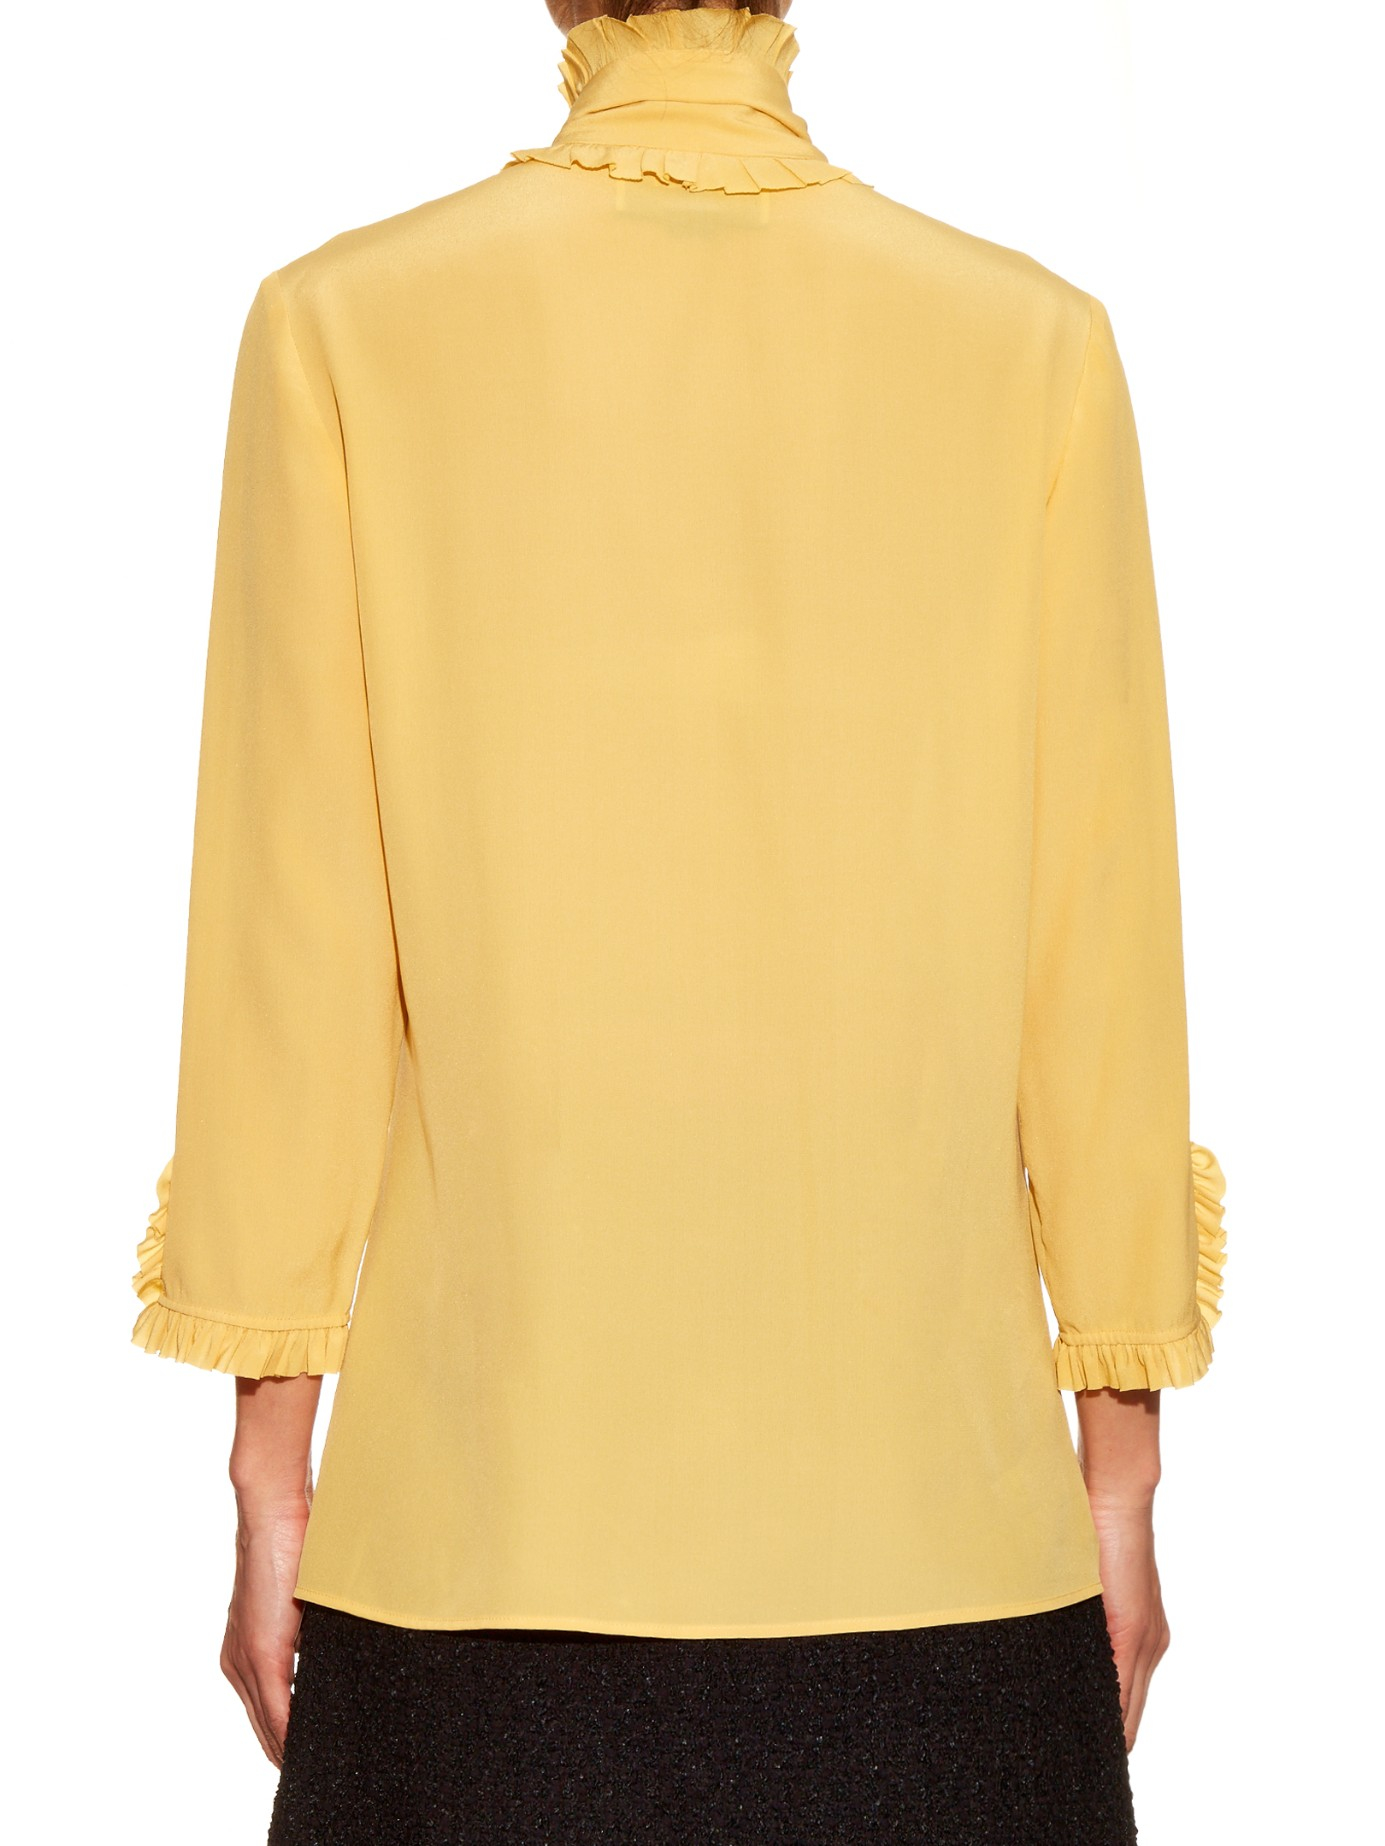 Gucci High-neck Ruffled Silk-crepe Blouse in Light Yellow (Yellow) - Lyst